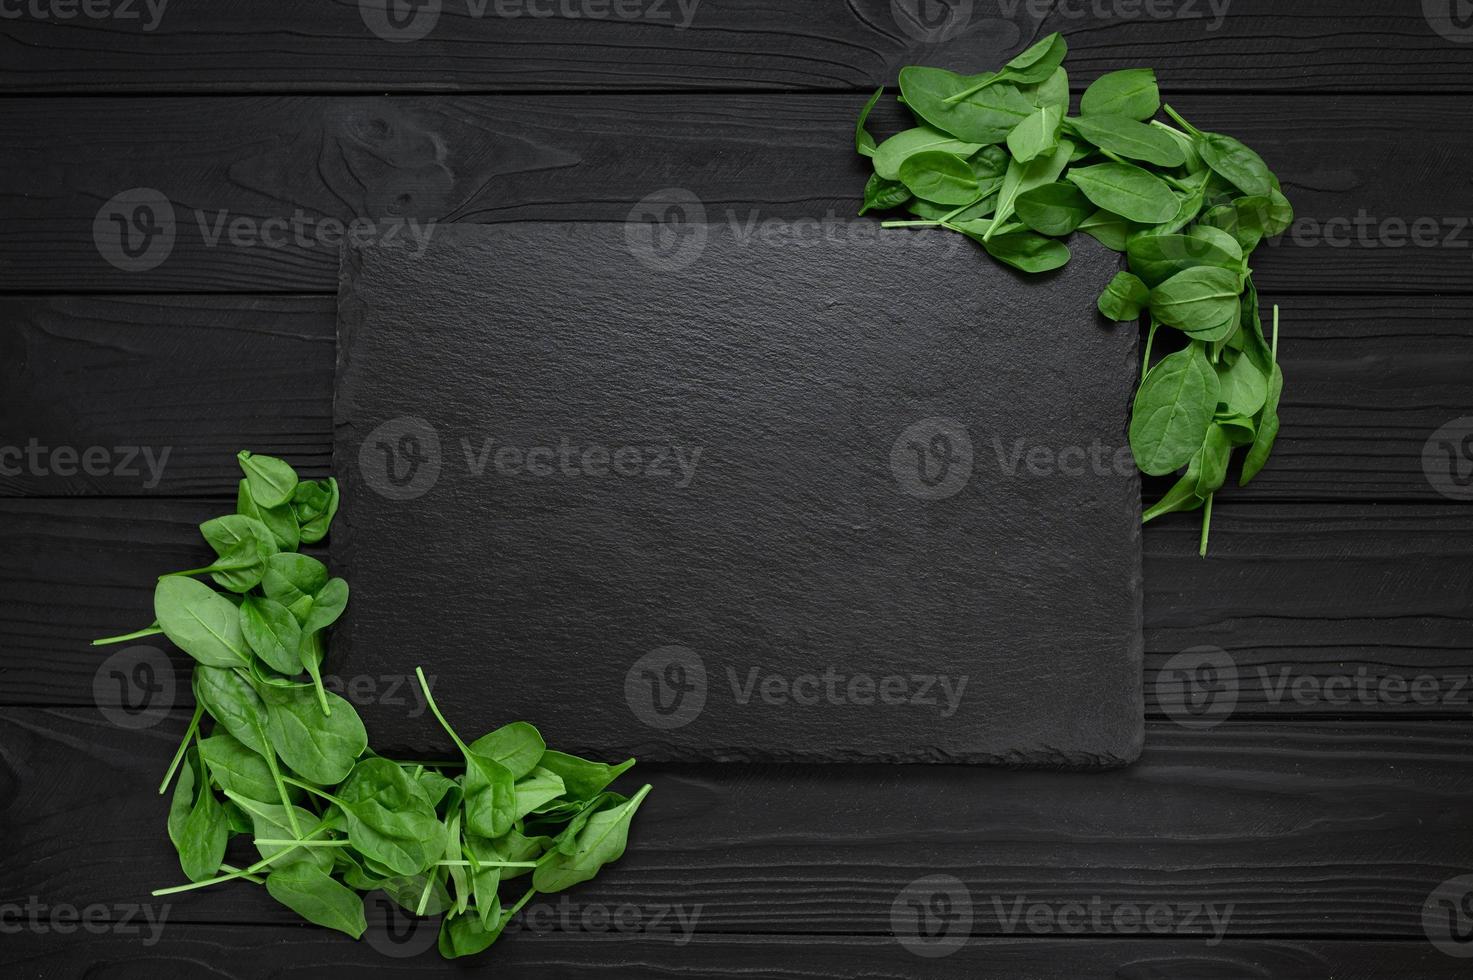 Kitchen table with stone cutting board, decorated with herbs. Presented on the black wooden background with center empty space. Table top view. photo